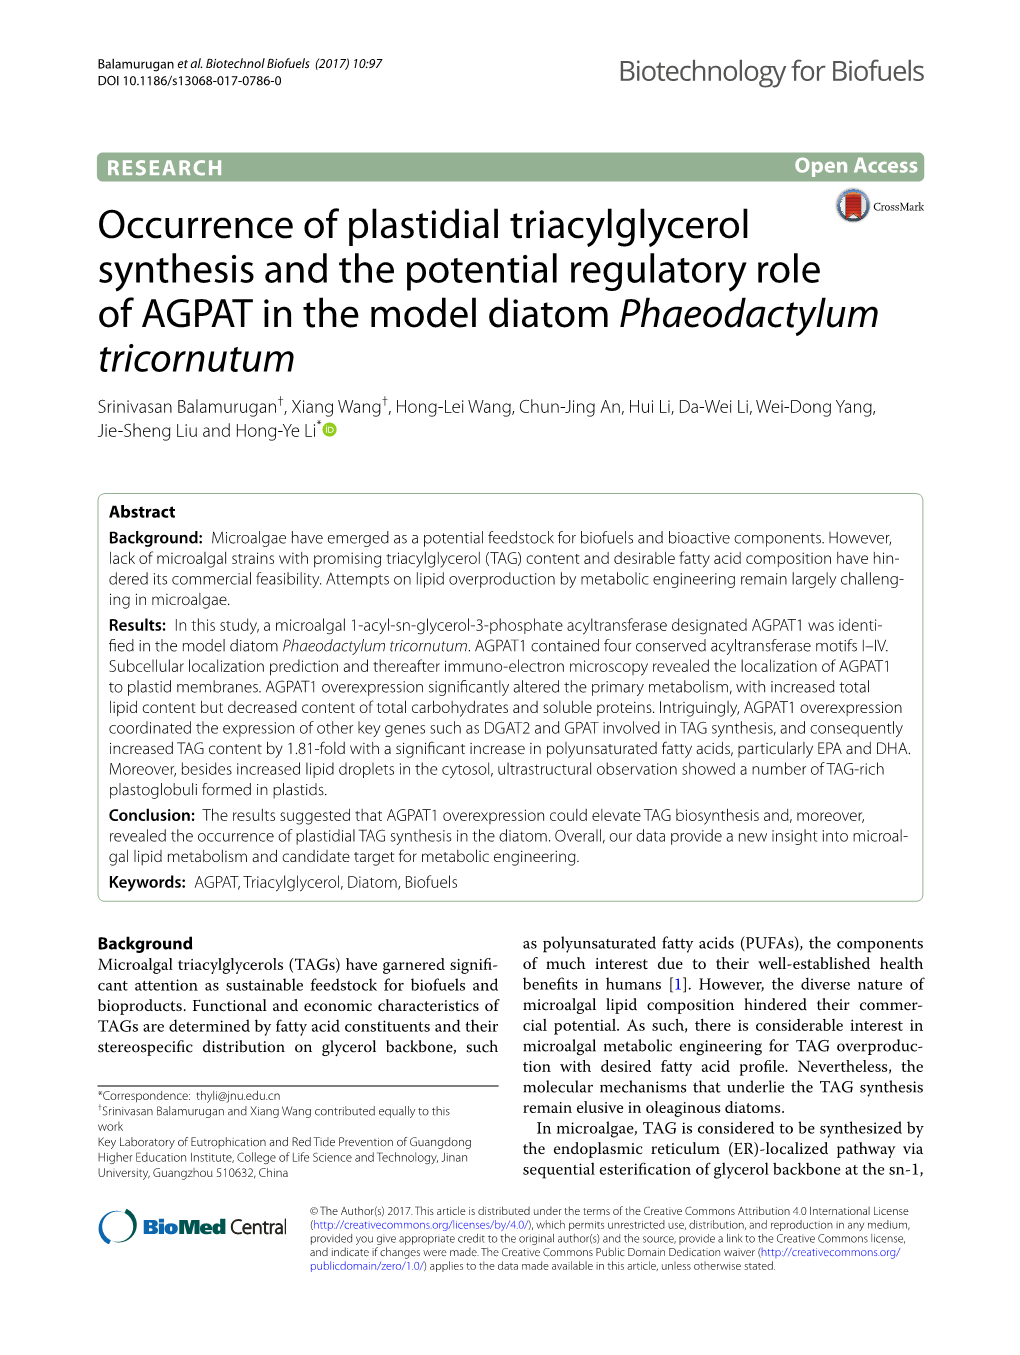 Occurrence of Plastidial Triacylglycerol Synthesis and the Potential Regulatory Role of AGPAT in the Model Diatom Phaeodactylum